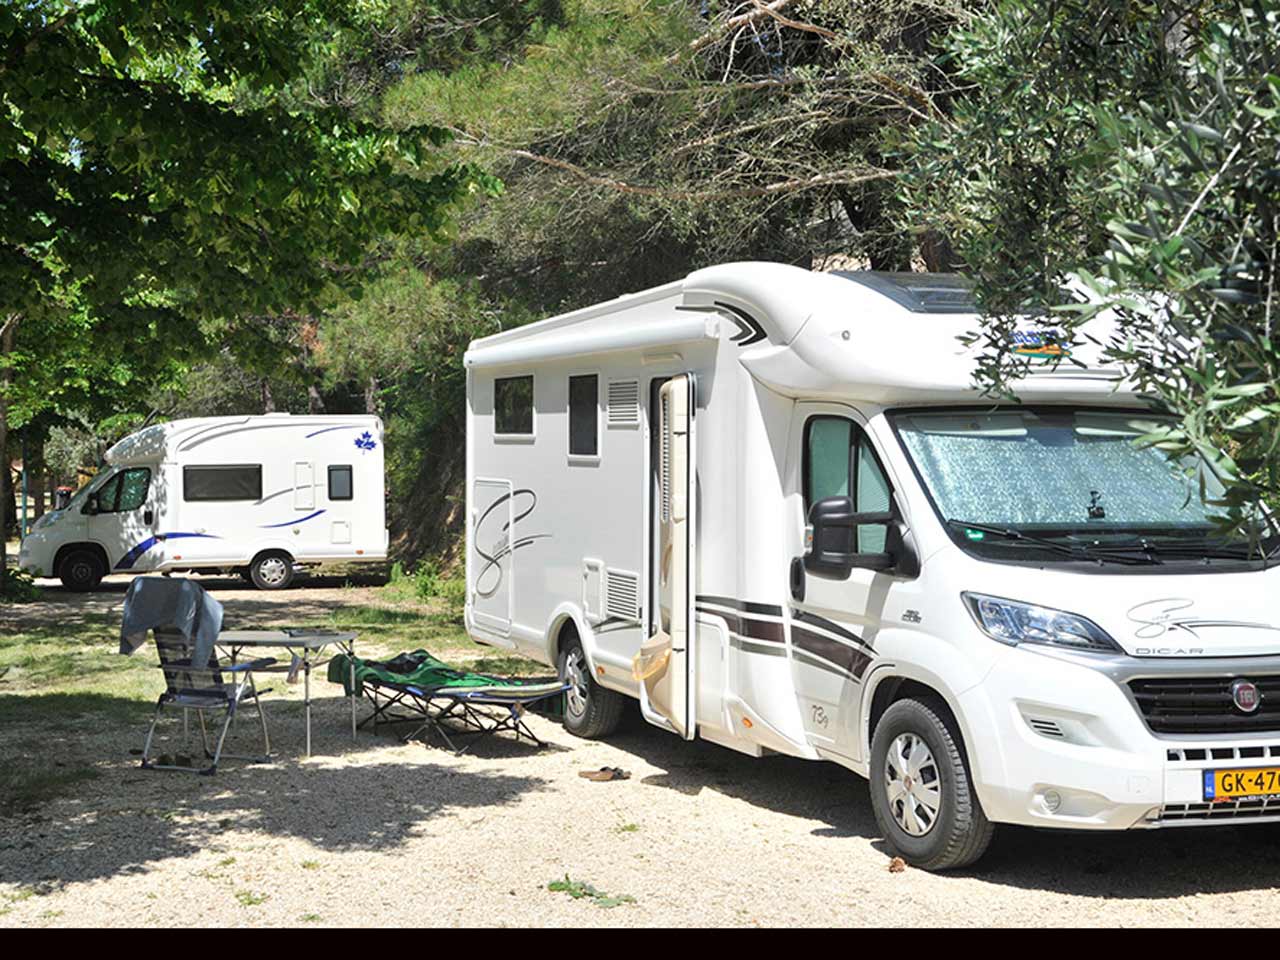 Camping Fontemaggio - weekend in camper in Umbria